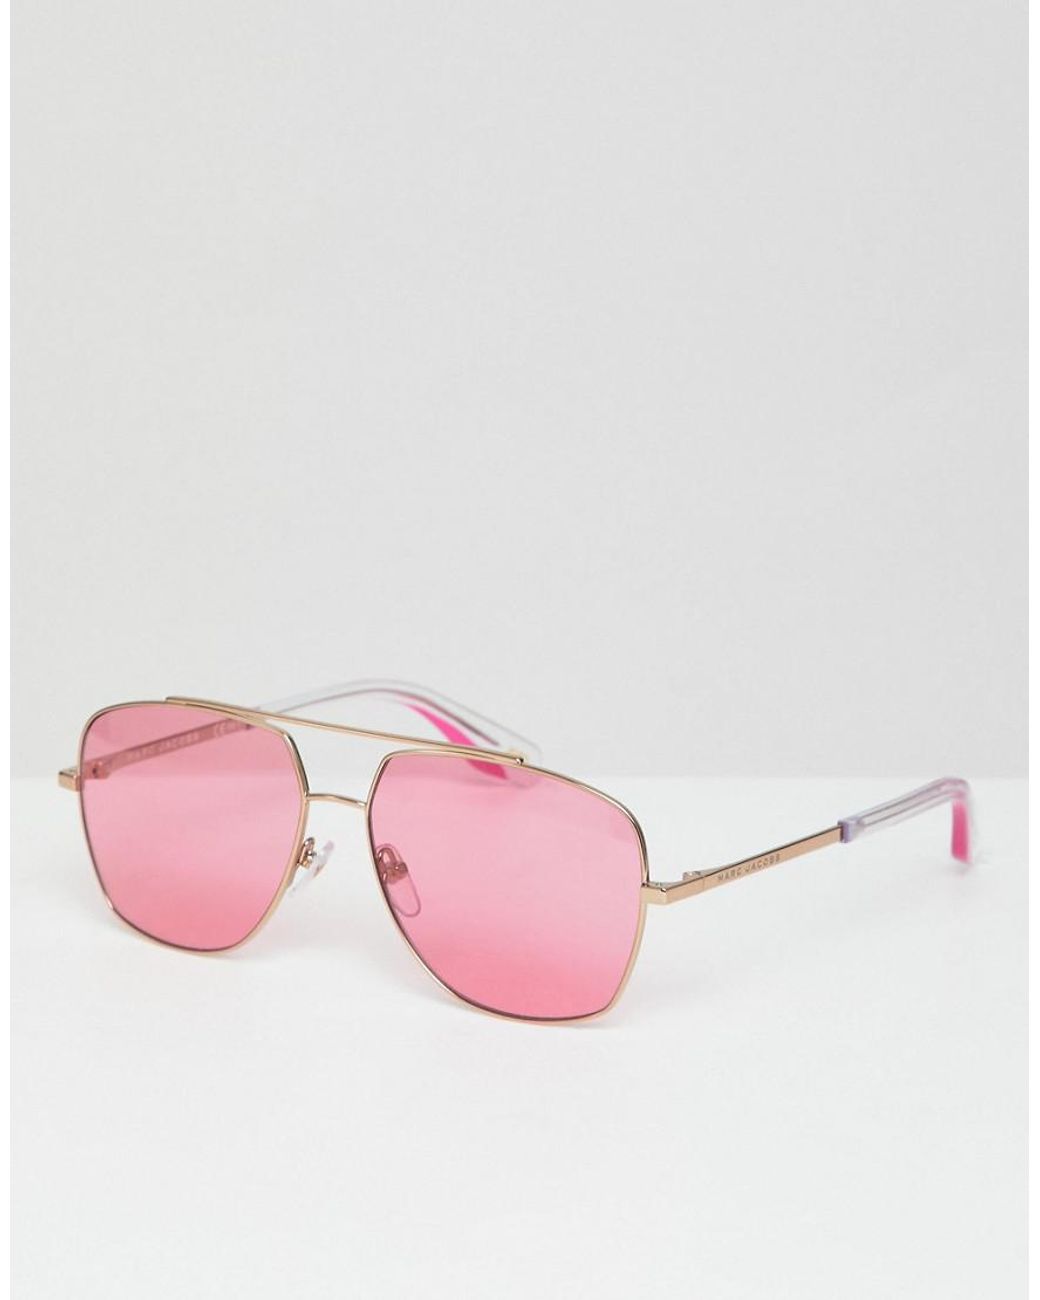 Marc Jacobs Aviator Sunglasses With Pink Lens in Metallic | Lyst